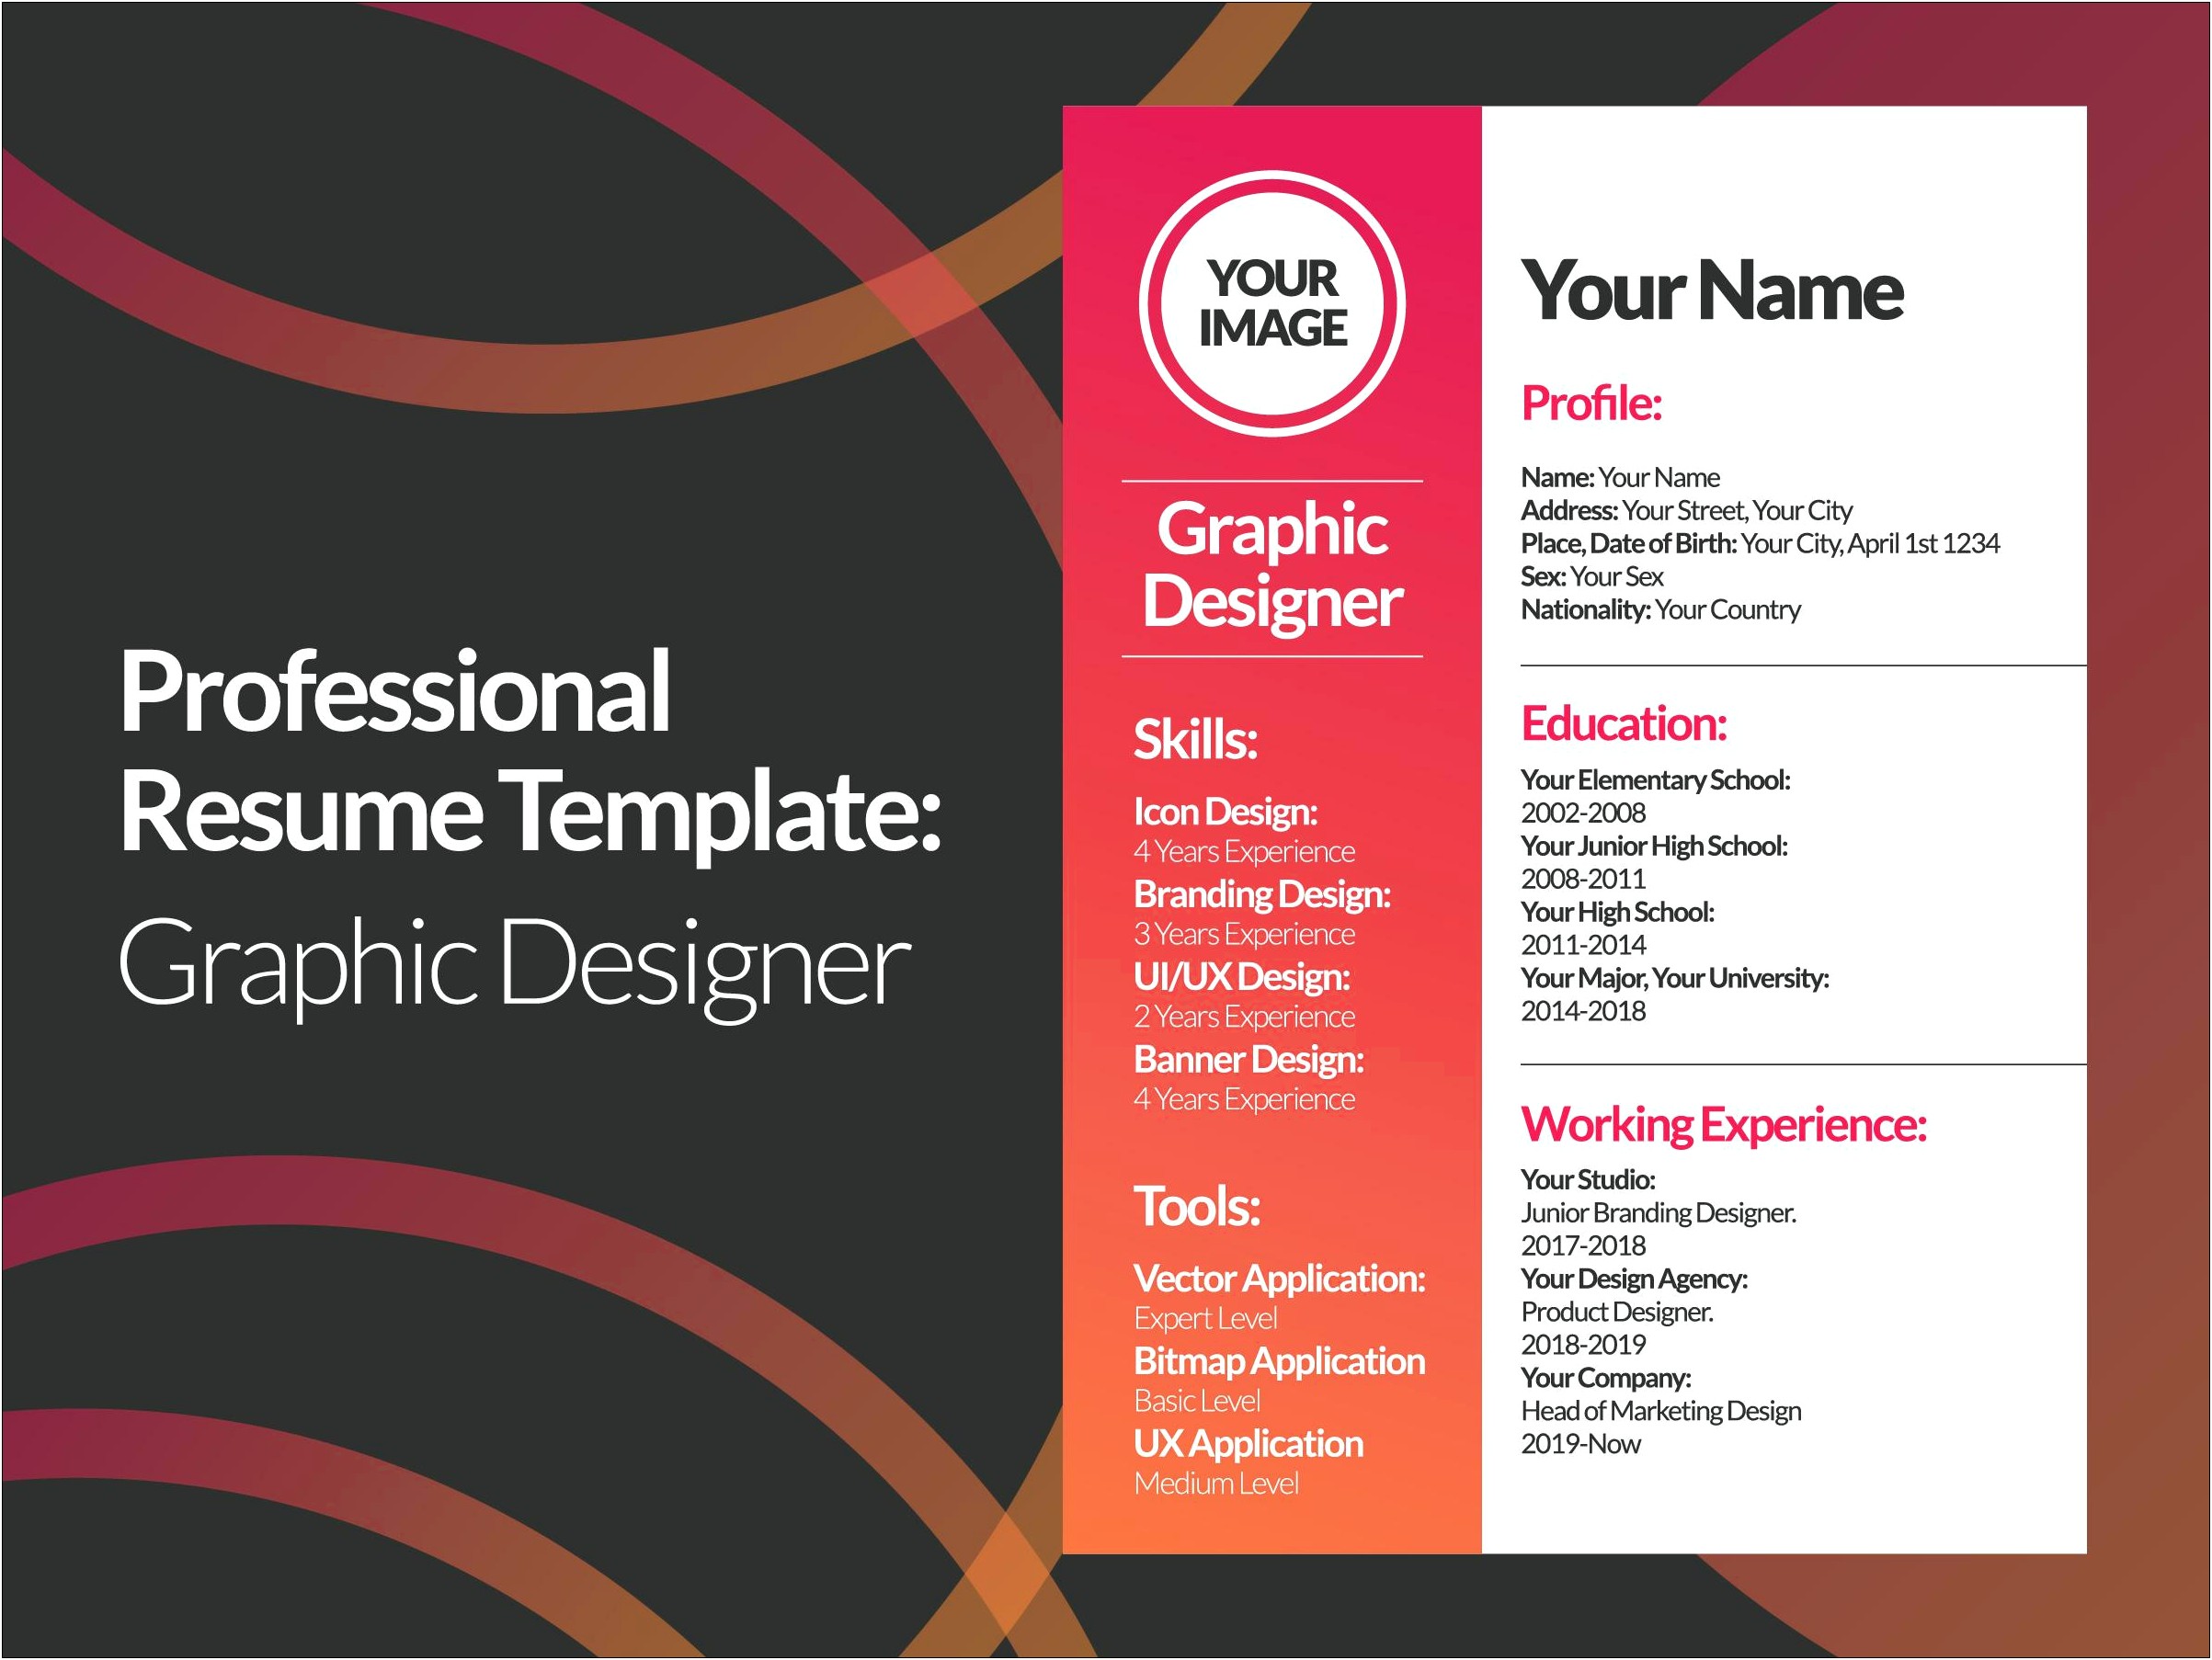 The Best Resume Format For A Graphic Designer